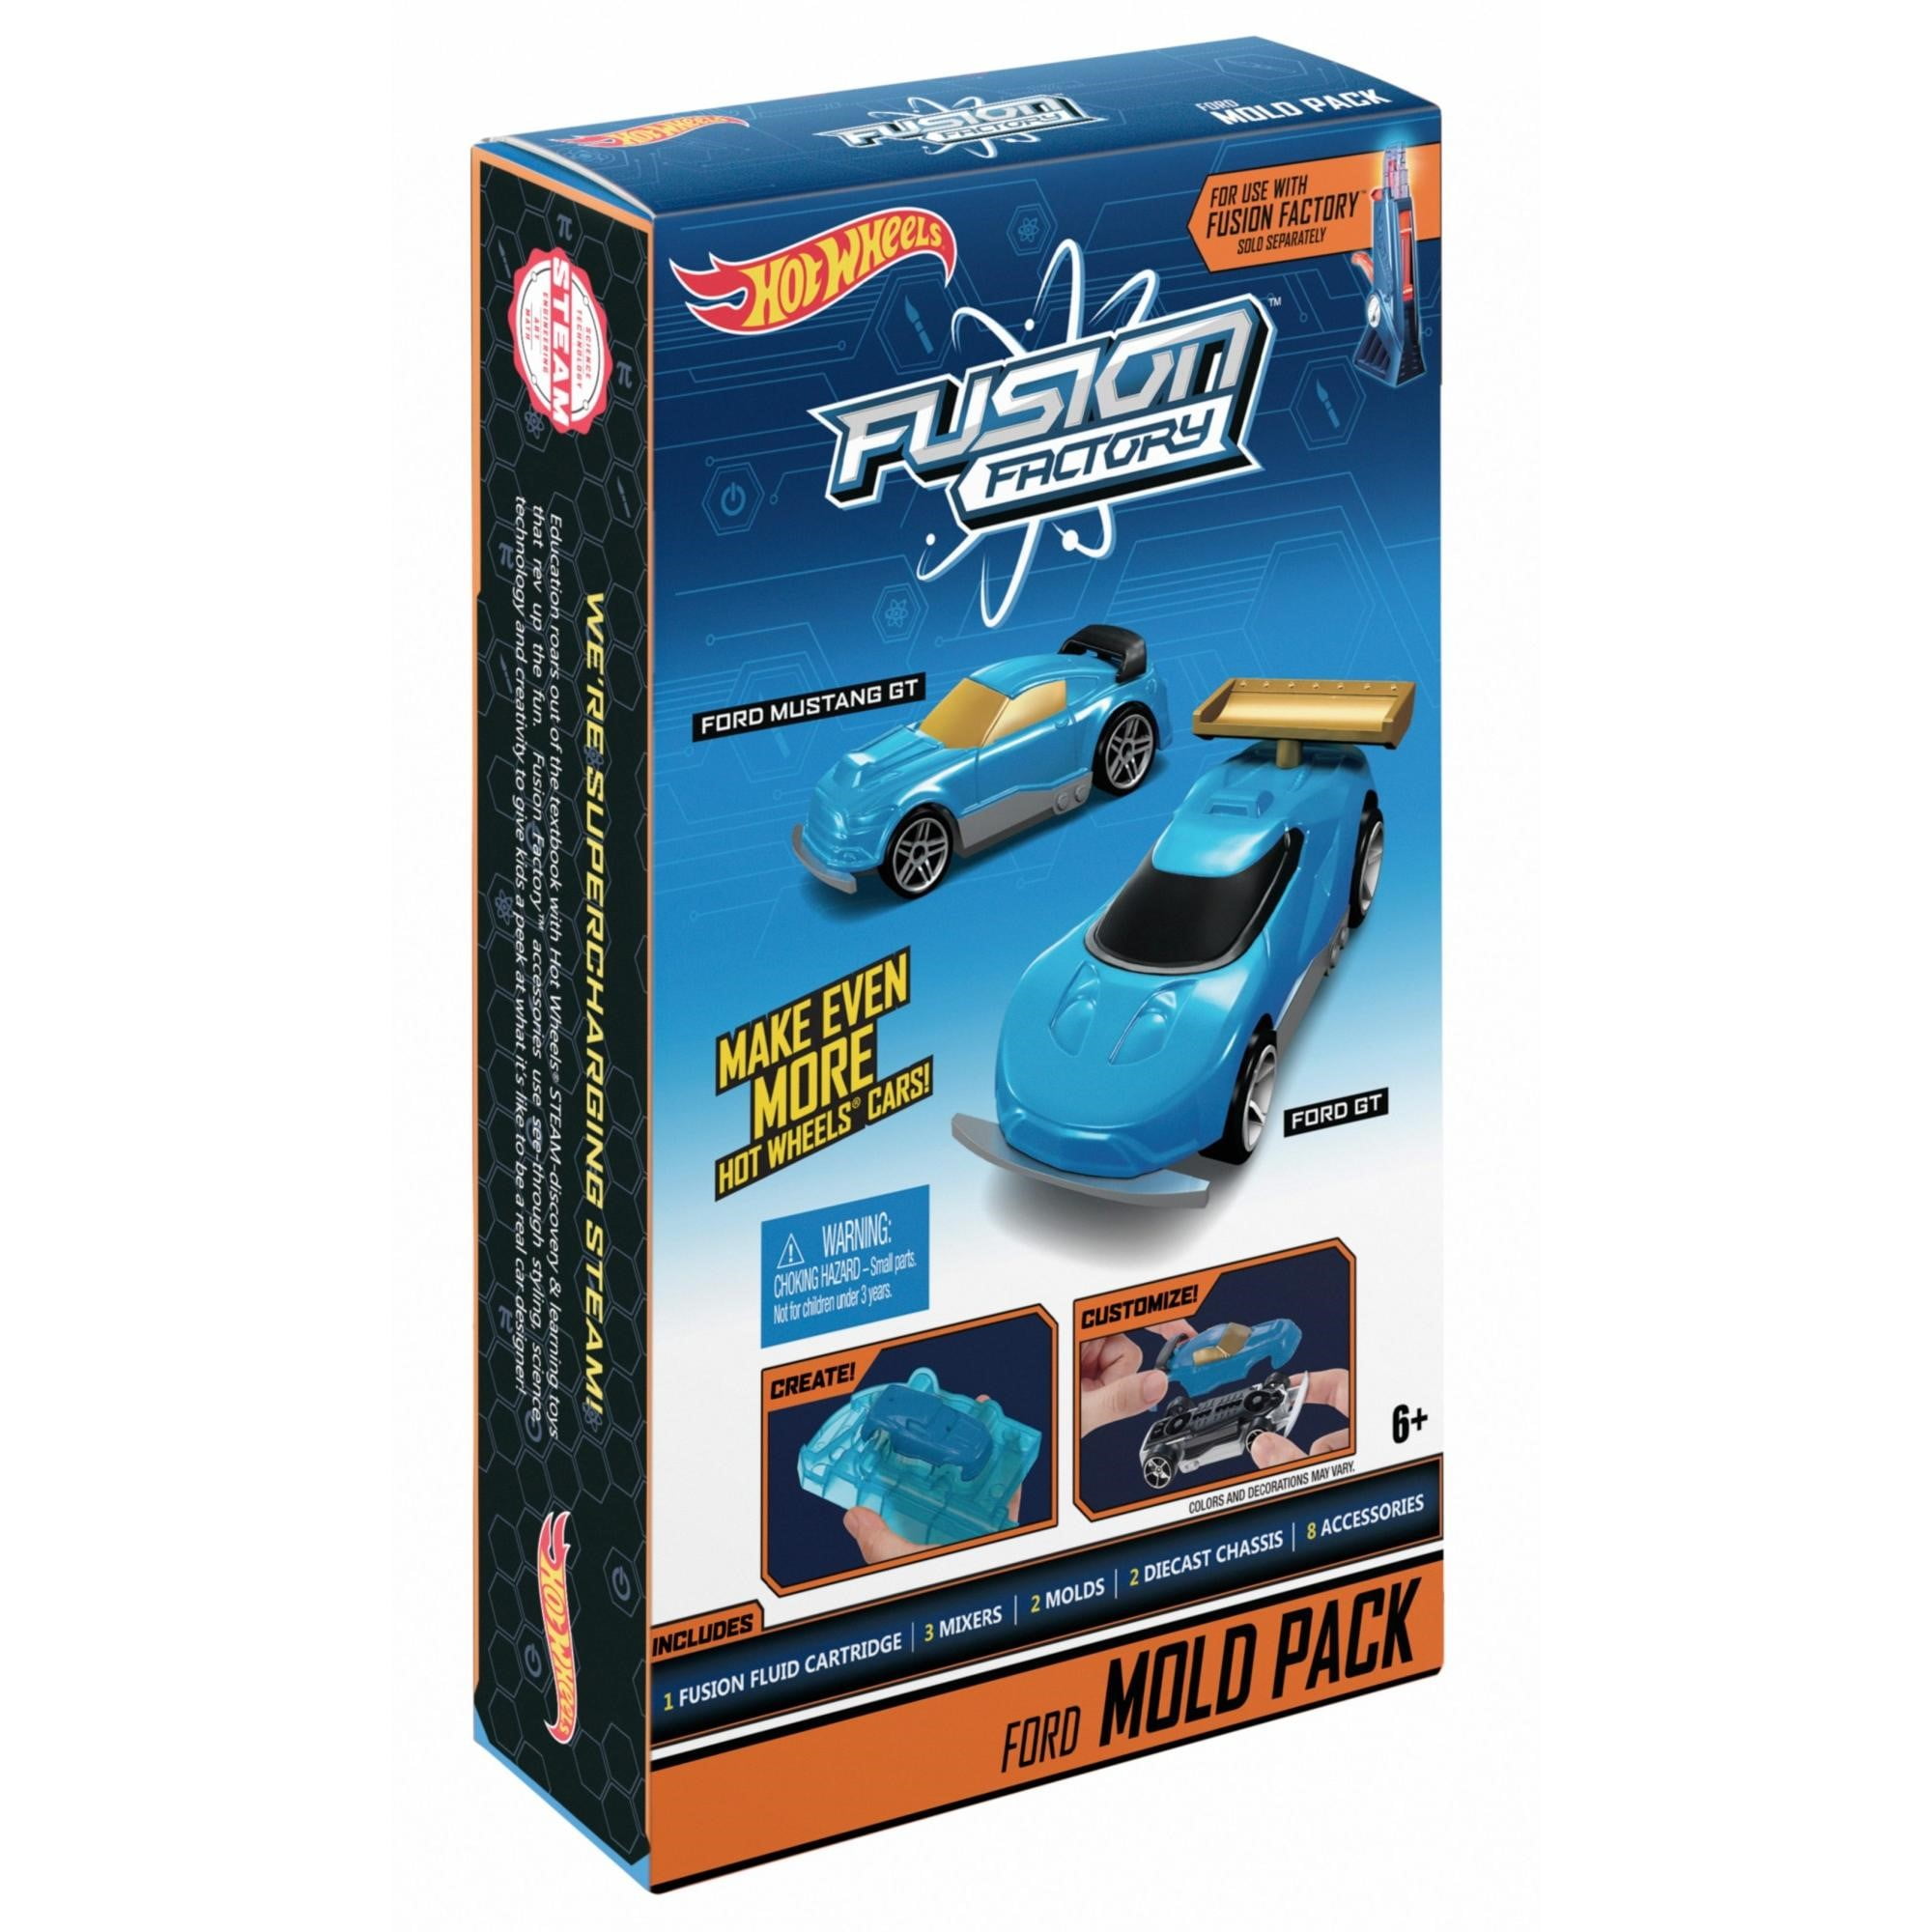 Hot Wheels Fusion Factory 2.0 Mold Pack 